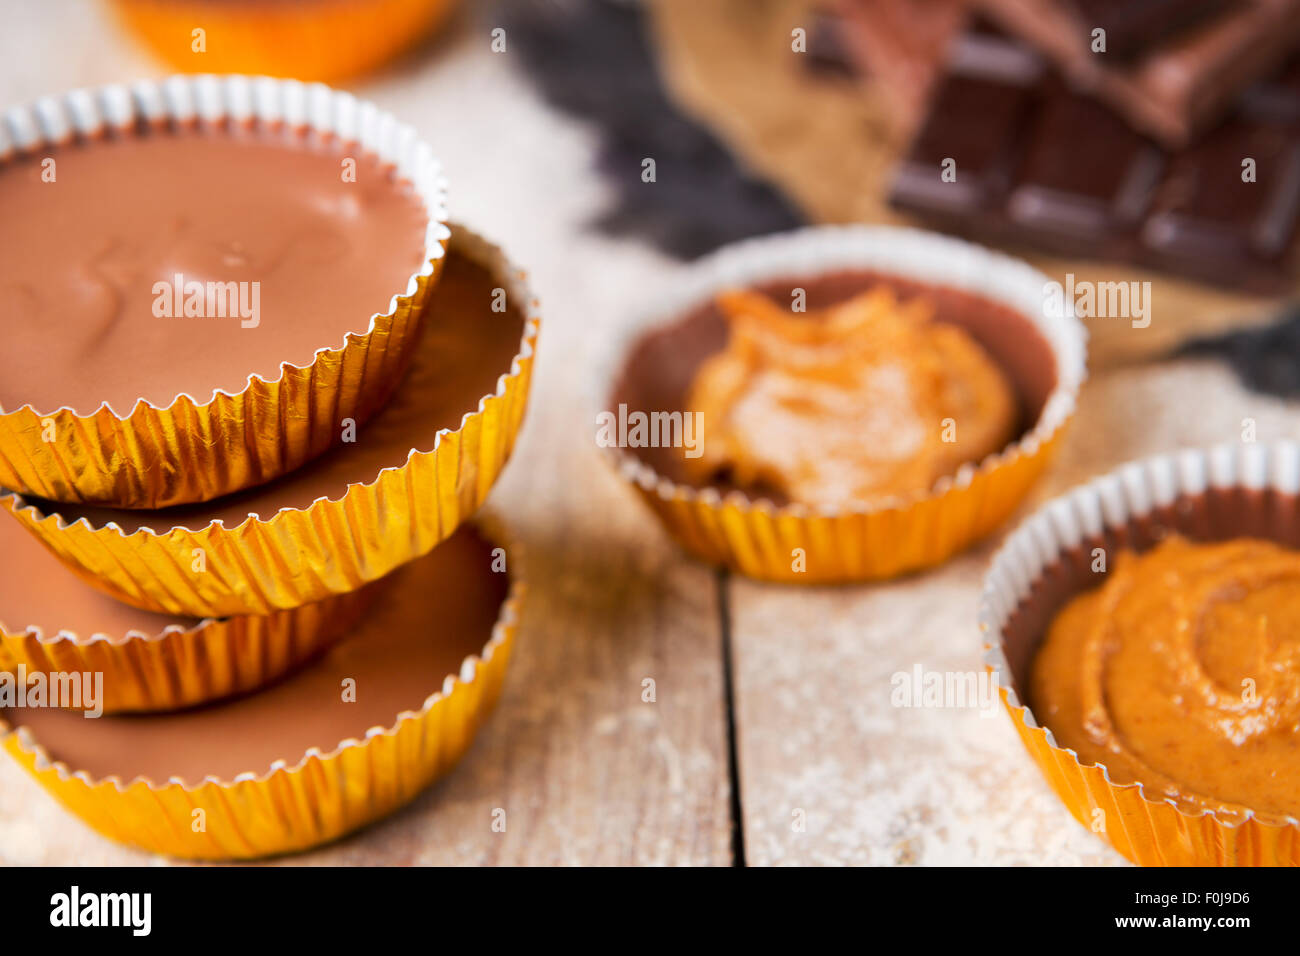 Homemade peanut butter cups on a rustic wooden table. Stock Photo